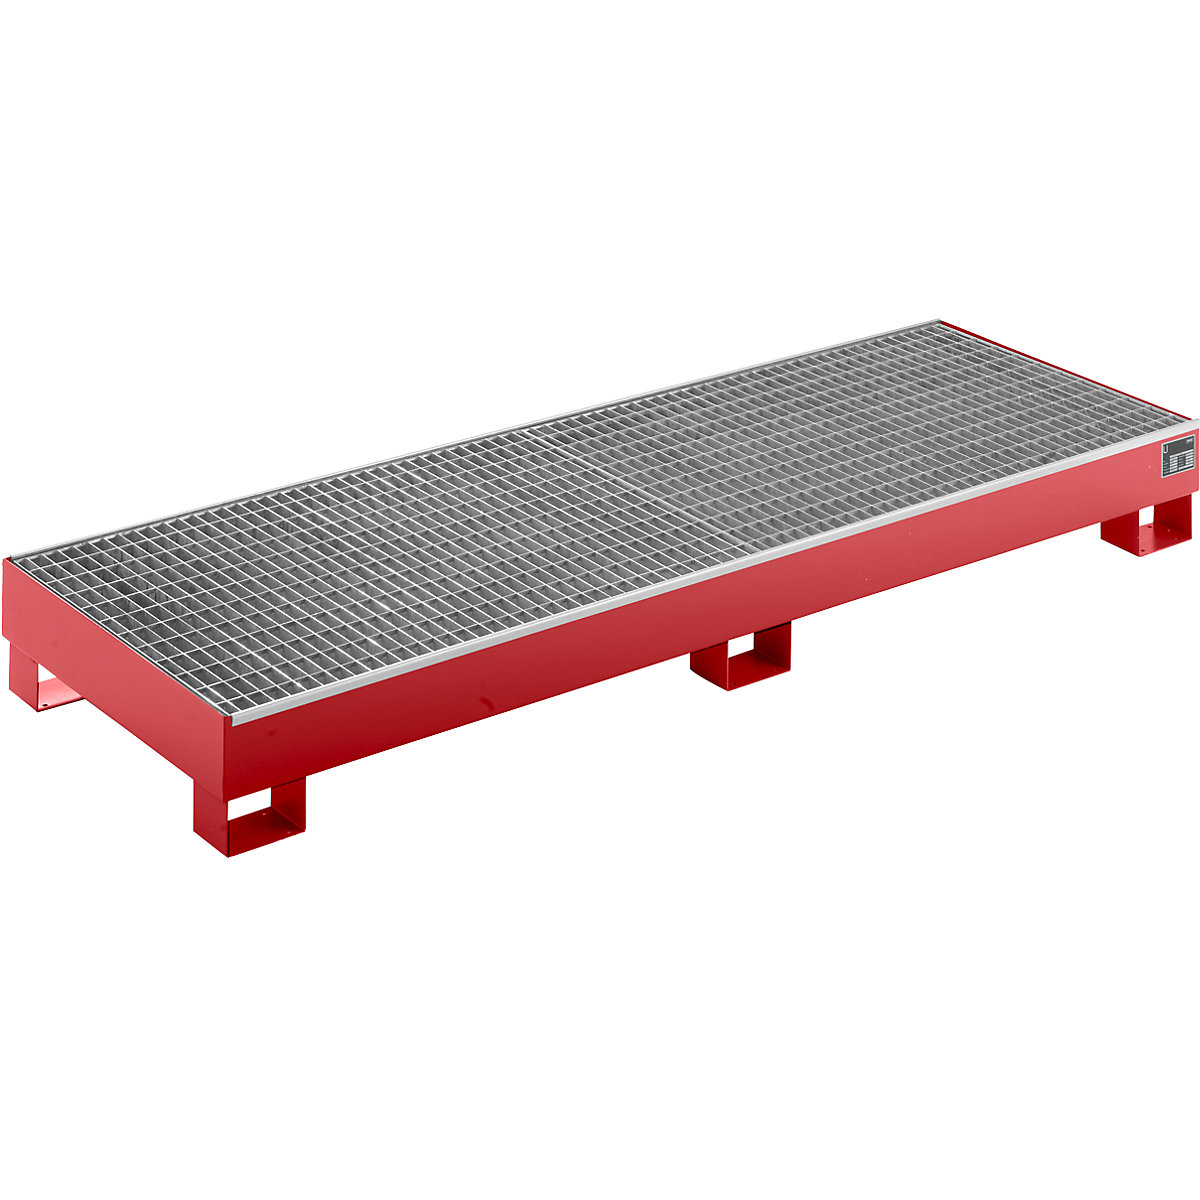 EUROKRAFTbasic – Sump tray made from sheet steel, LxWxH 2400 x 800 x 250 mm, red RAL 3000, with grate